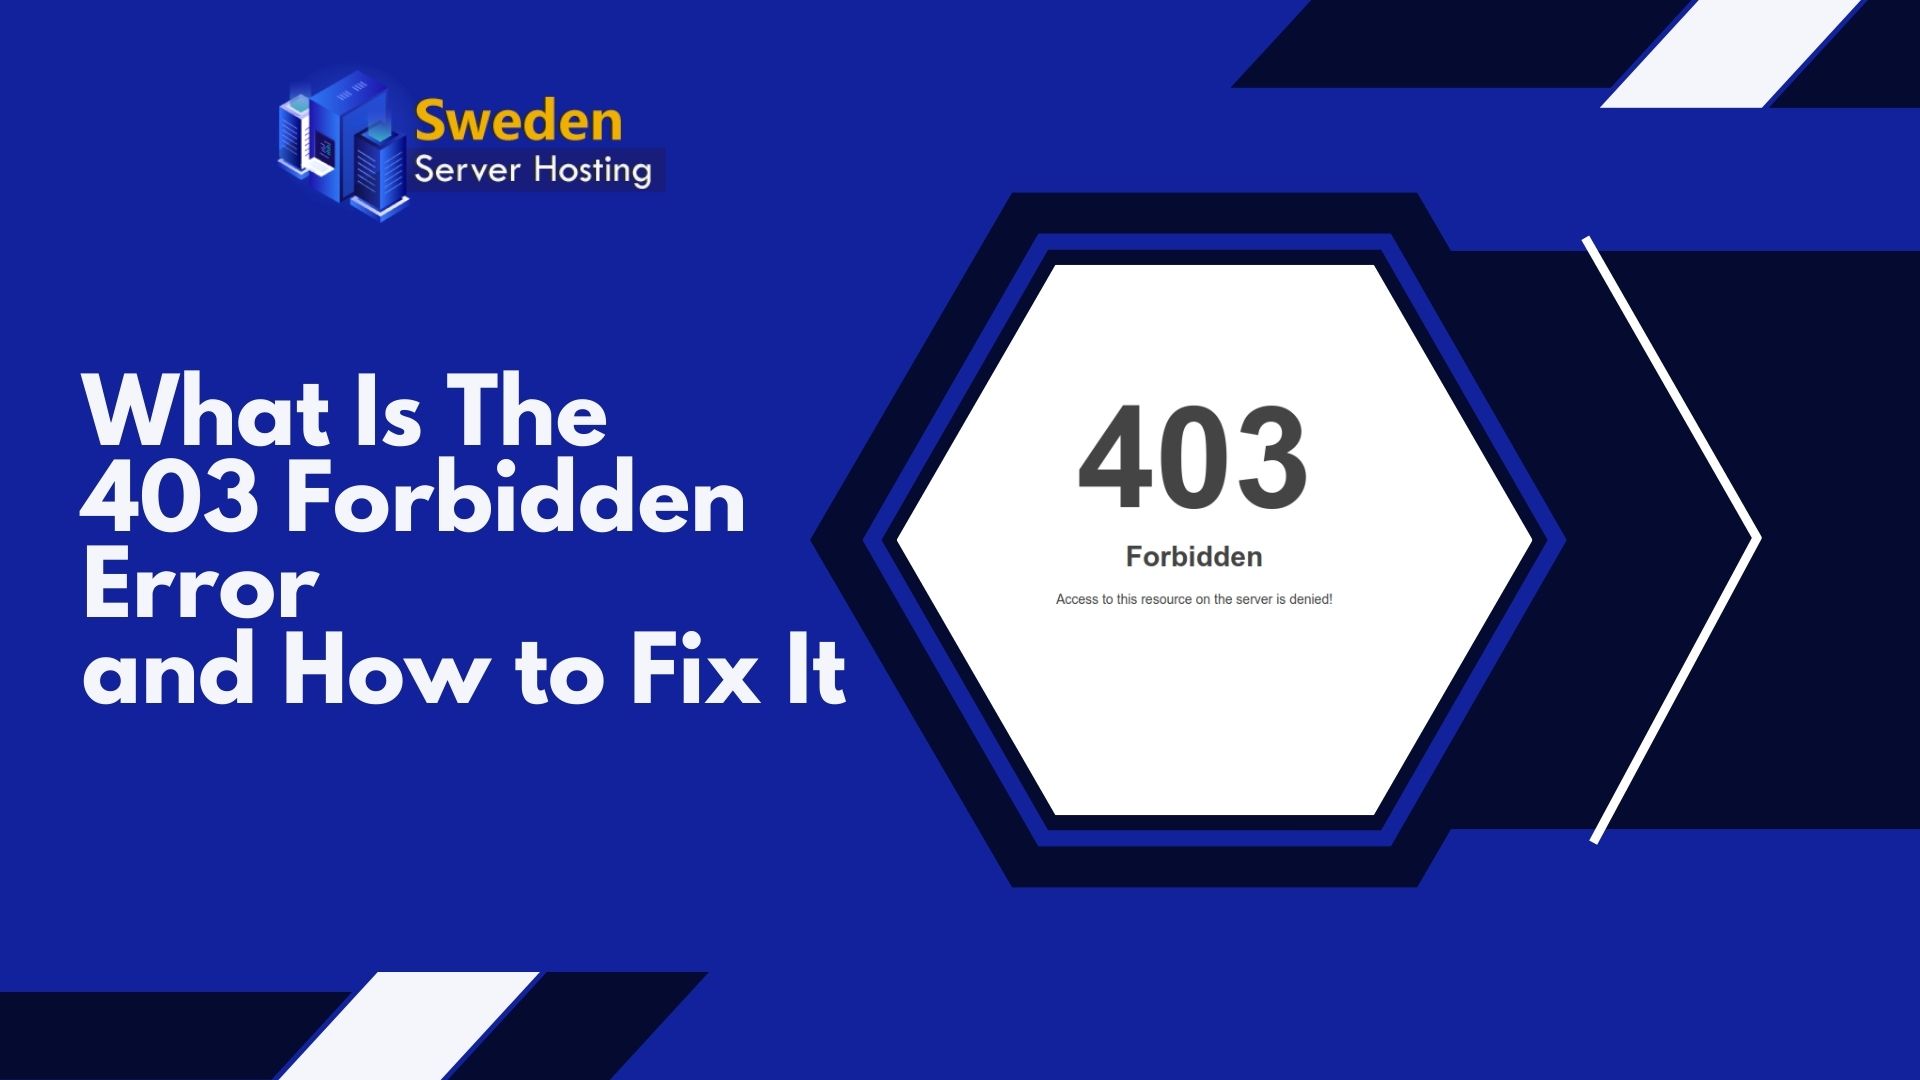 What Is The 403 Forbidden Error and How to Fix It